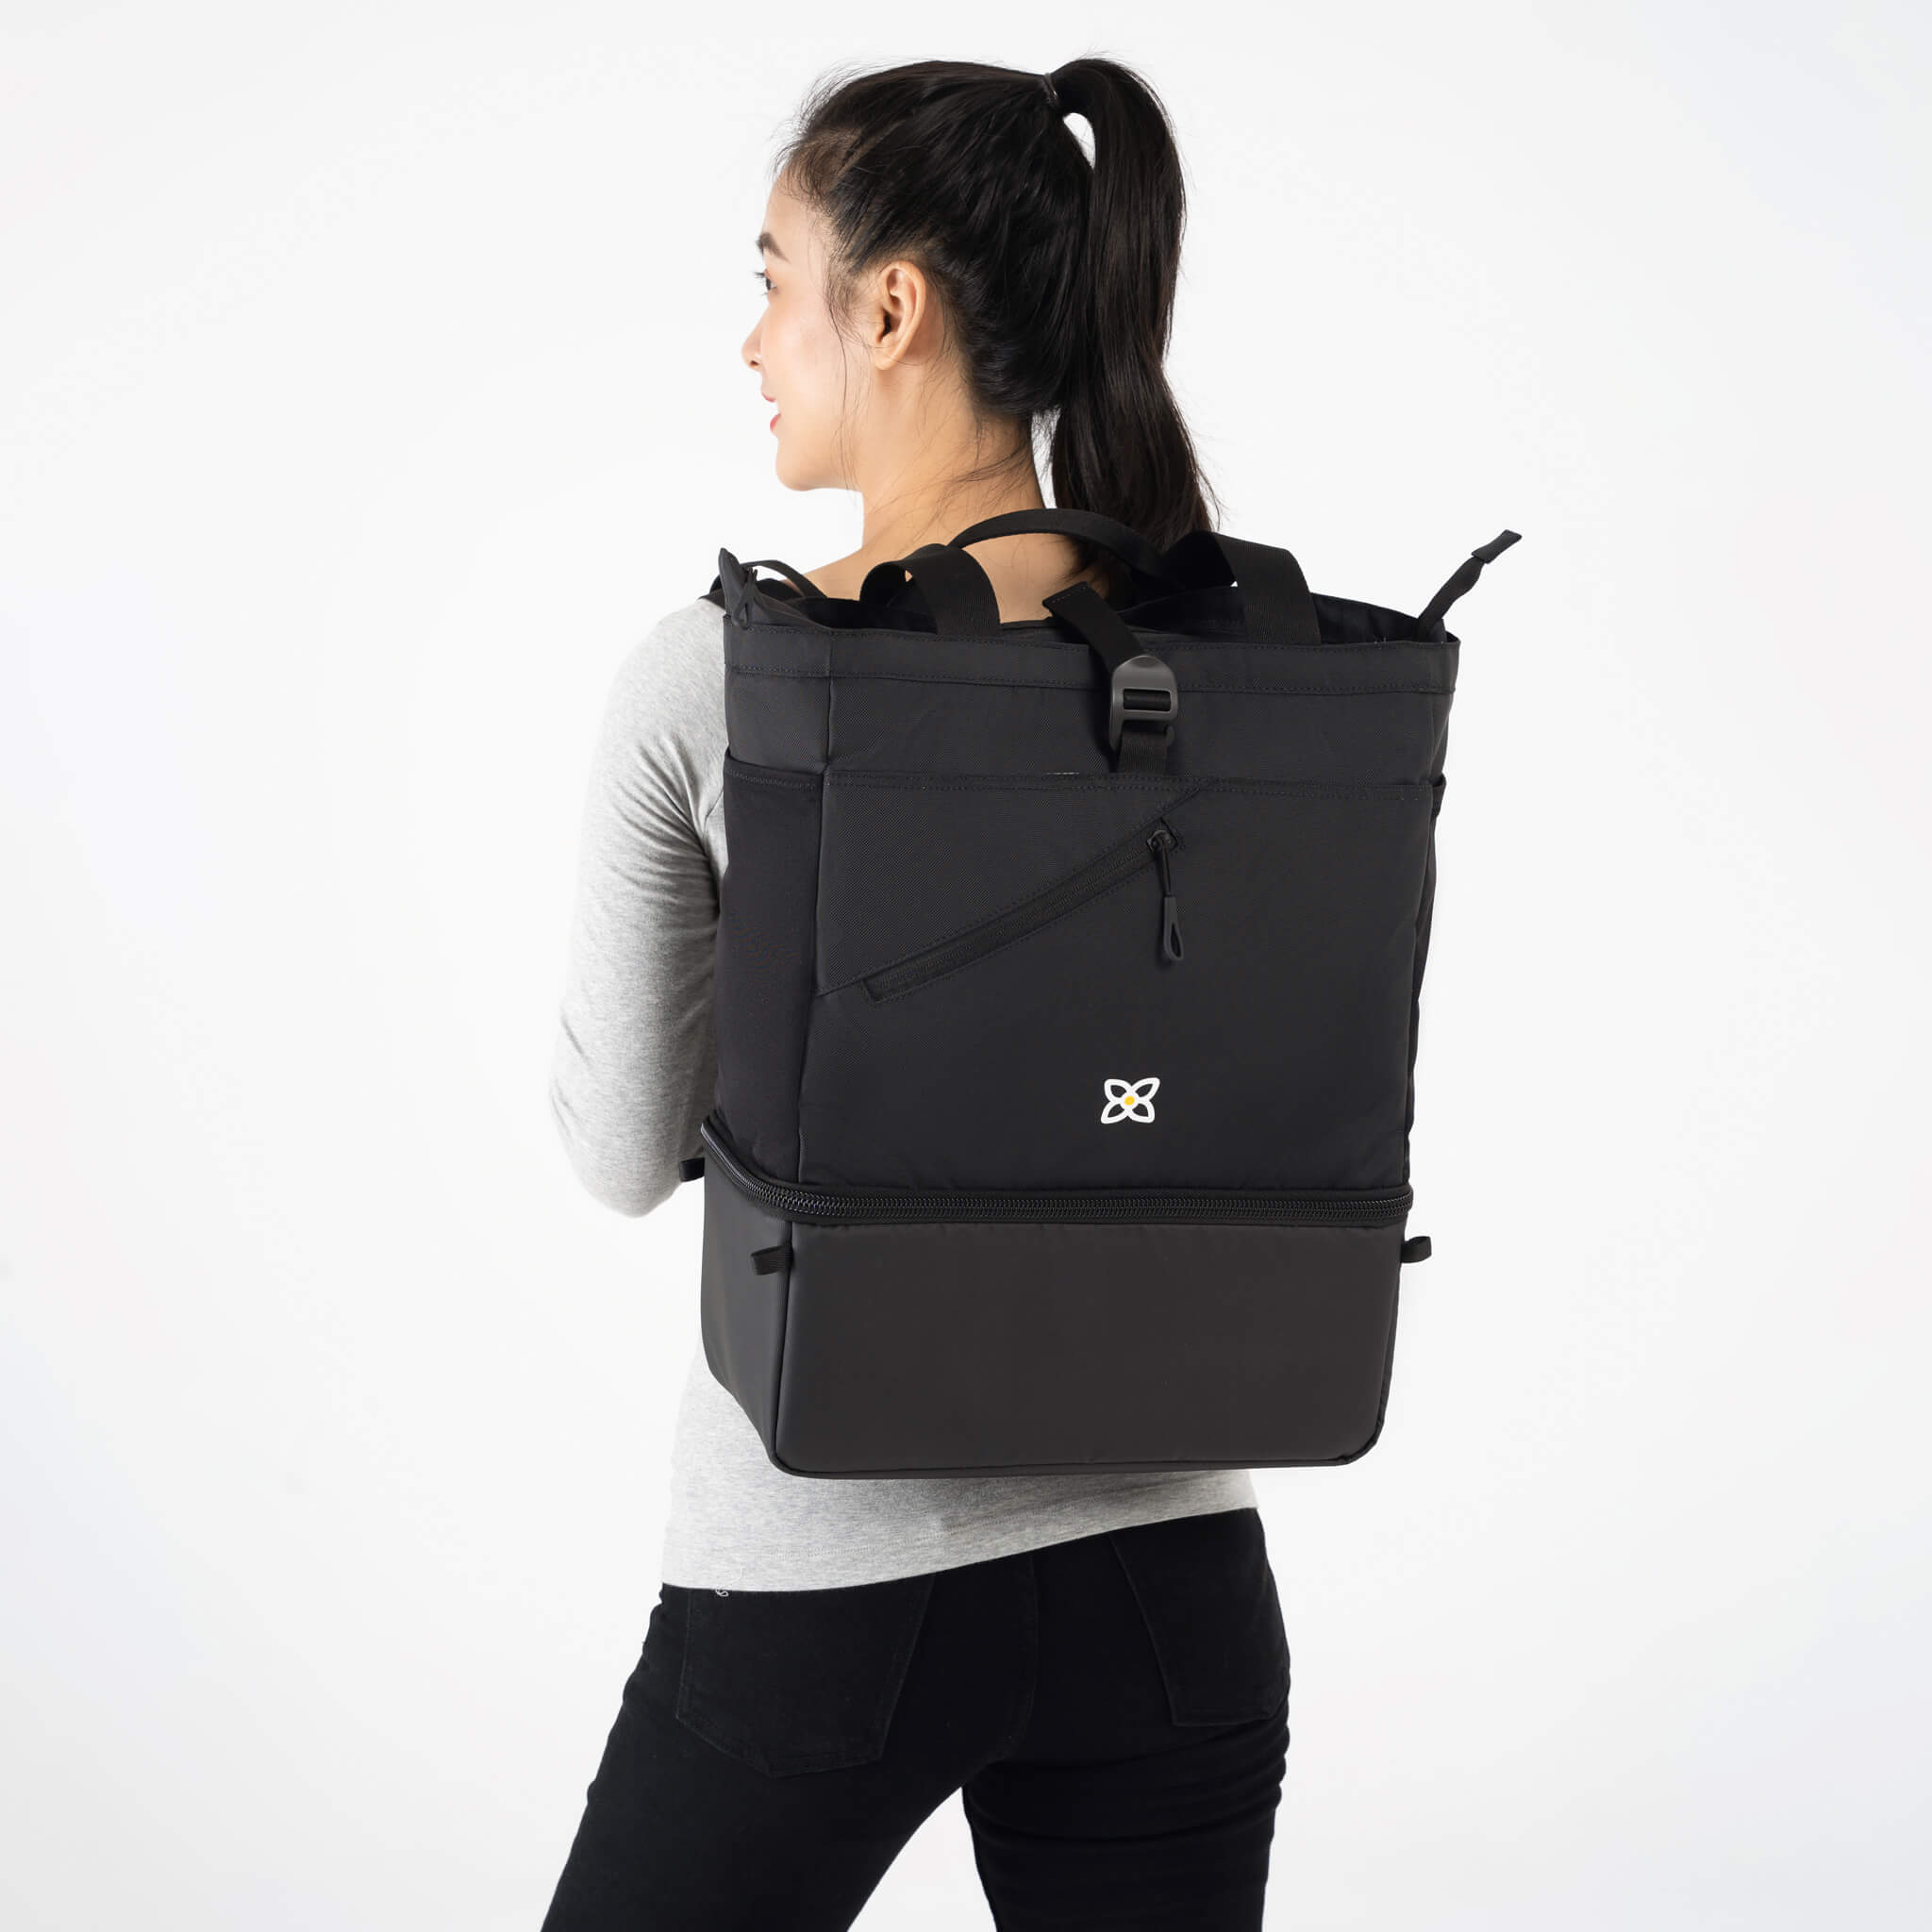 A model facing to the back. She is wearing a gray top and black leggings. She carries Sherpani bag, the Terra in Raven, as a backpack. 